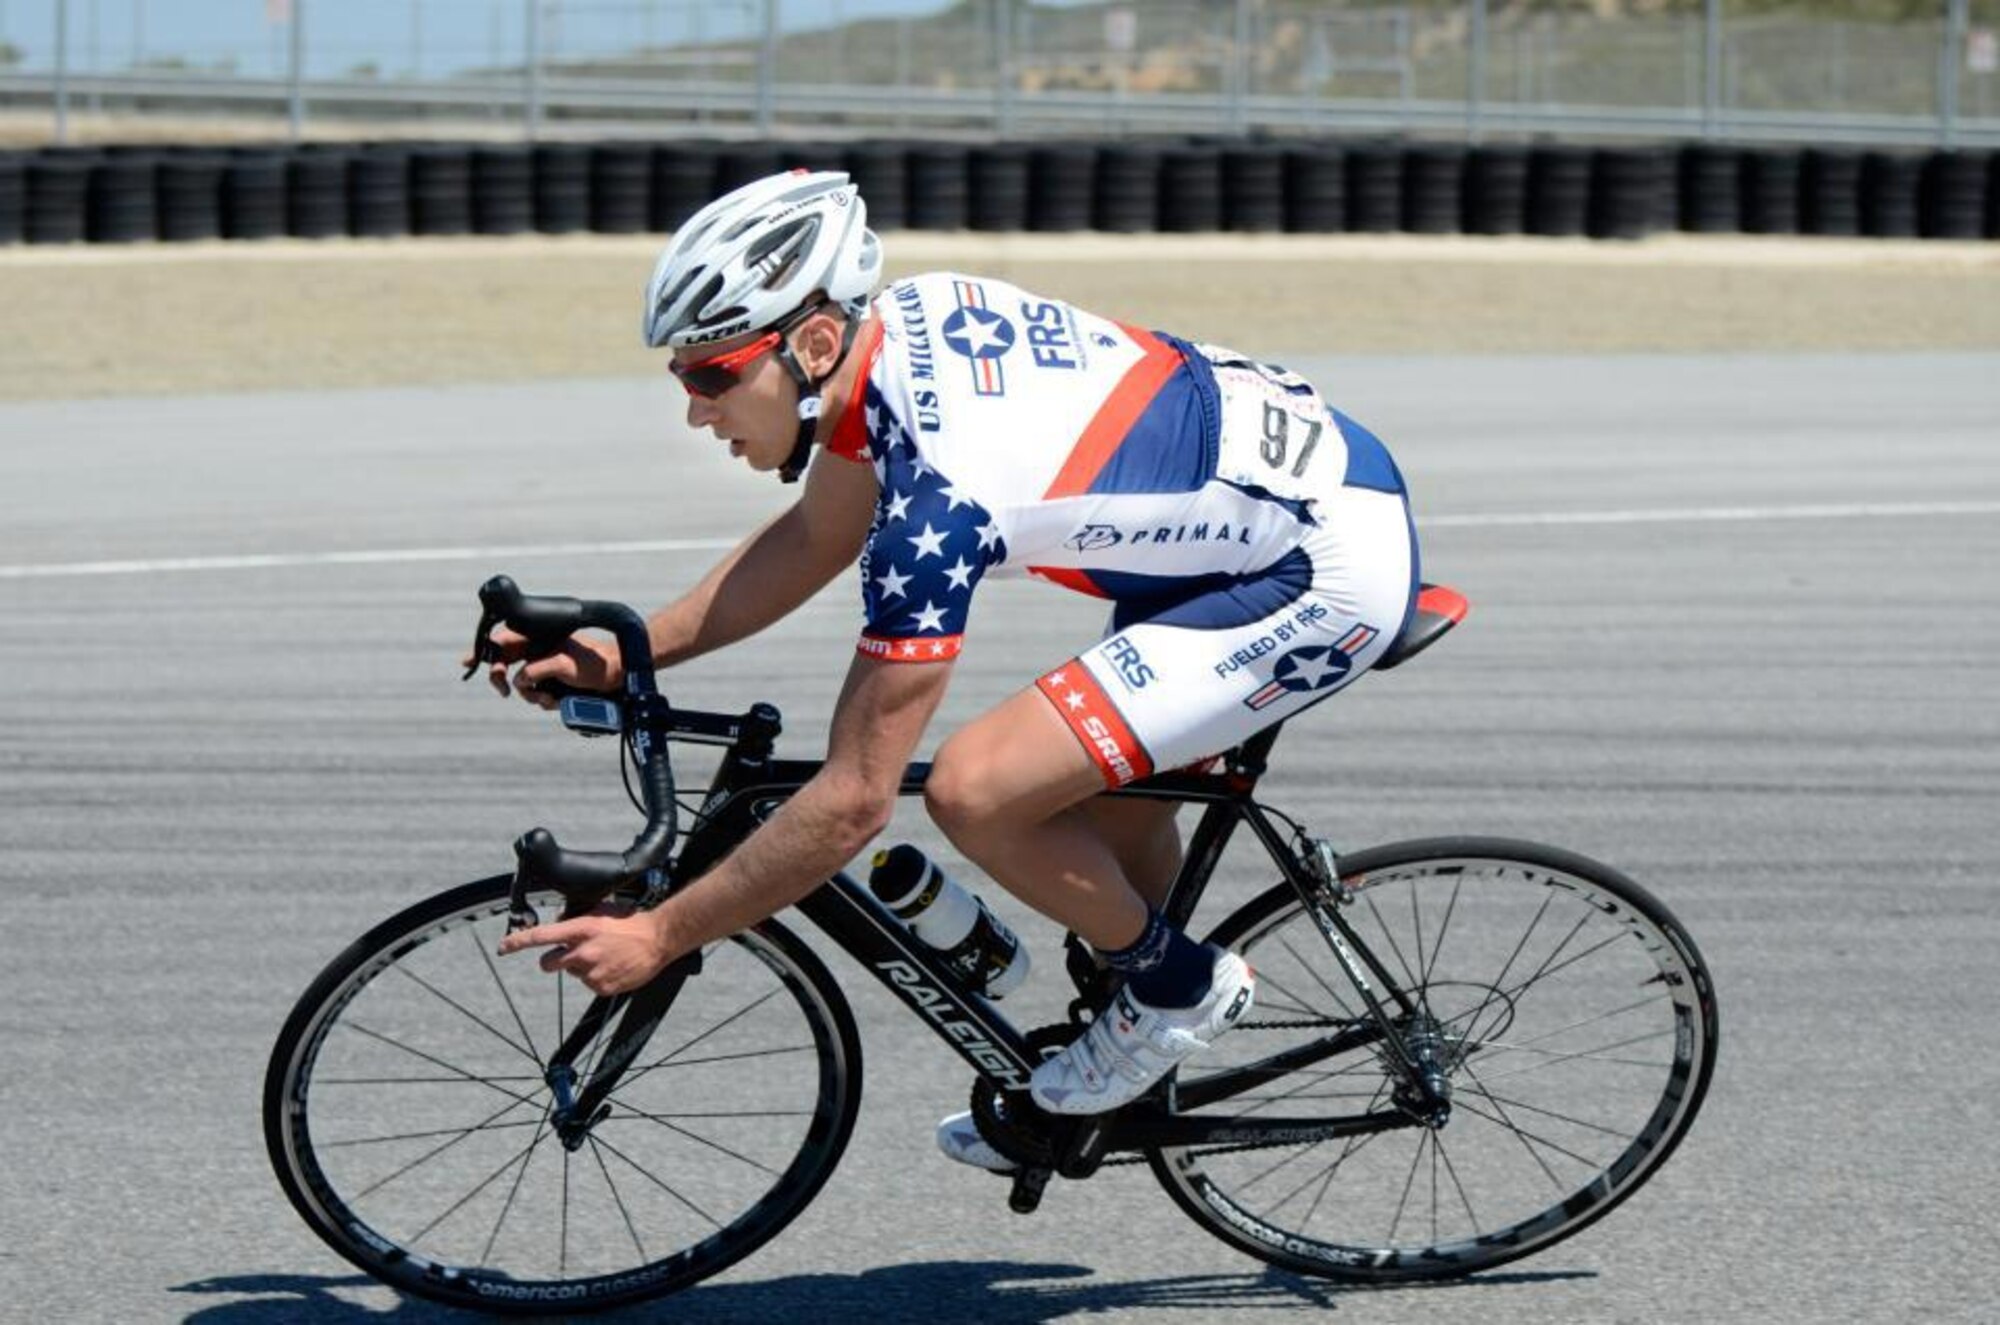 Tech. Sgt. Dwayne Farr competes in the Sea Otter Cycling Classic in 2013. Farr is one of 10 members on the Defense Department road bike racing team, and the only team member who is in the Air National Guard. (Photo courtesy of Dwayne Farr)